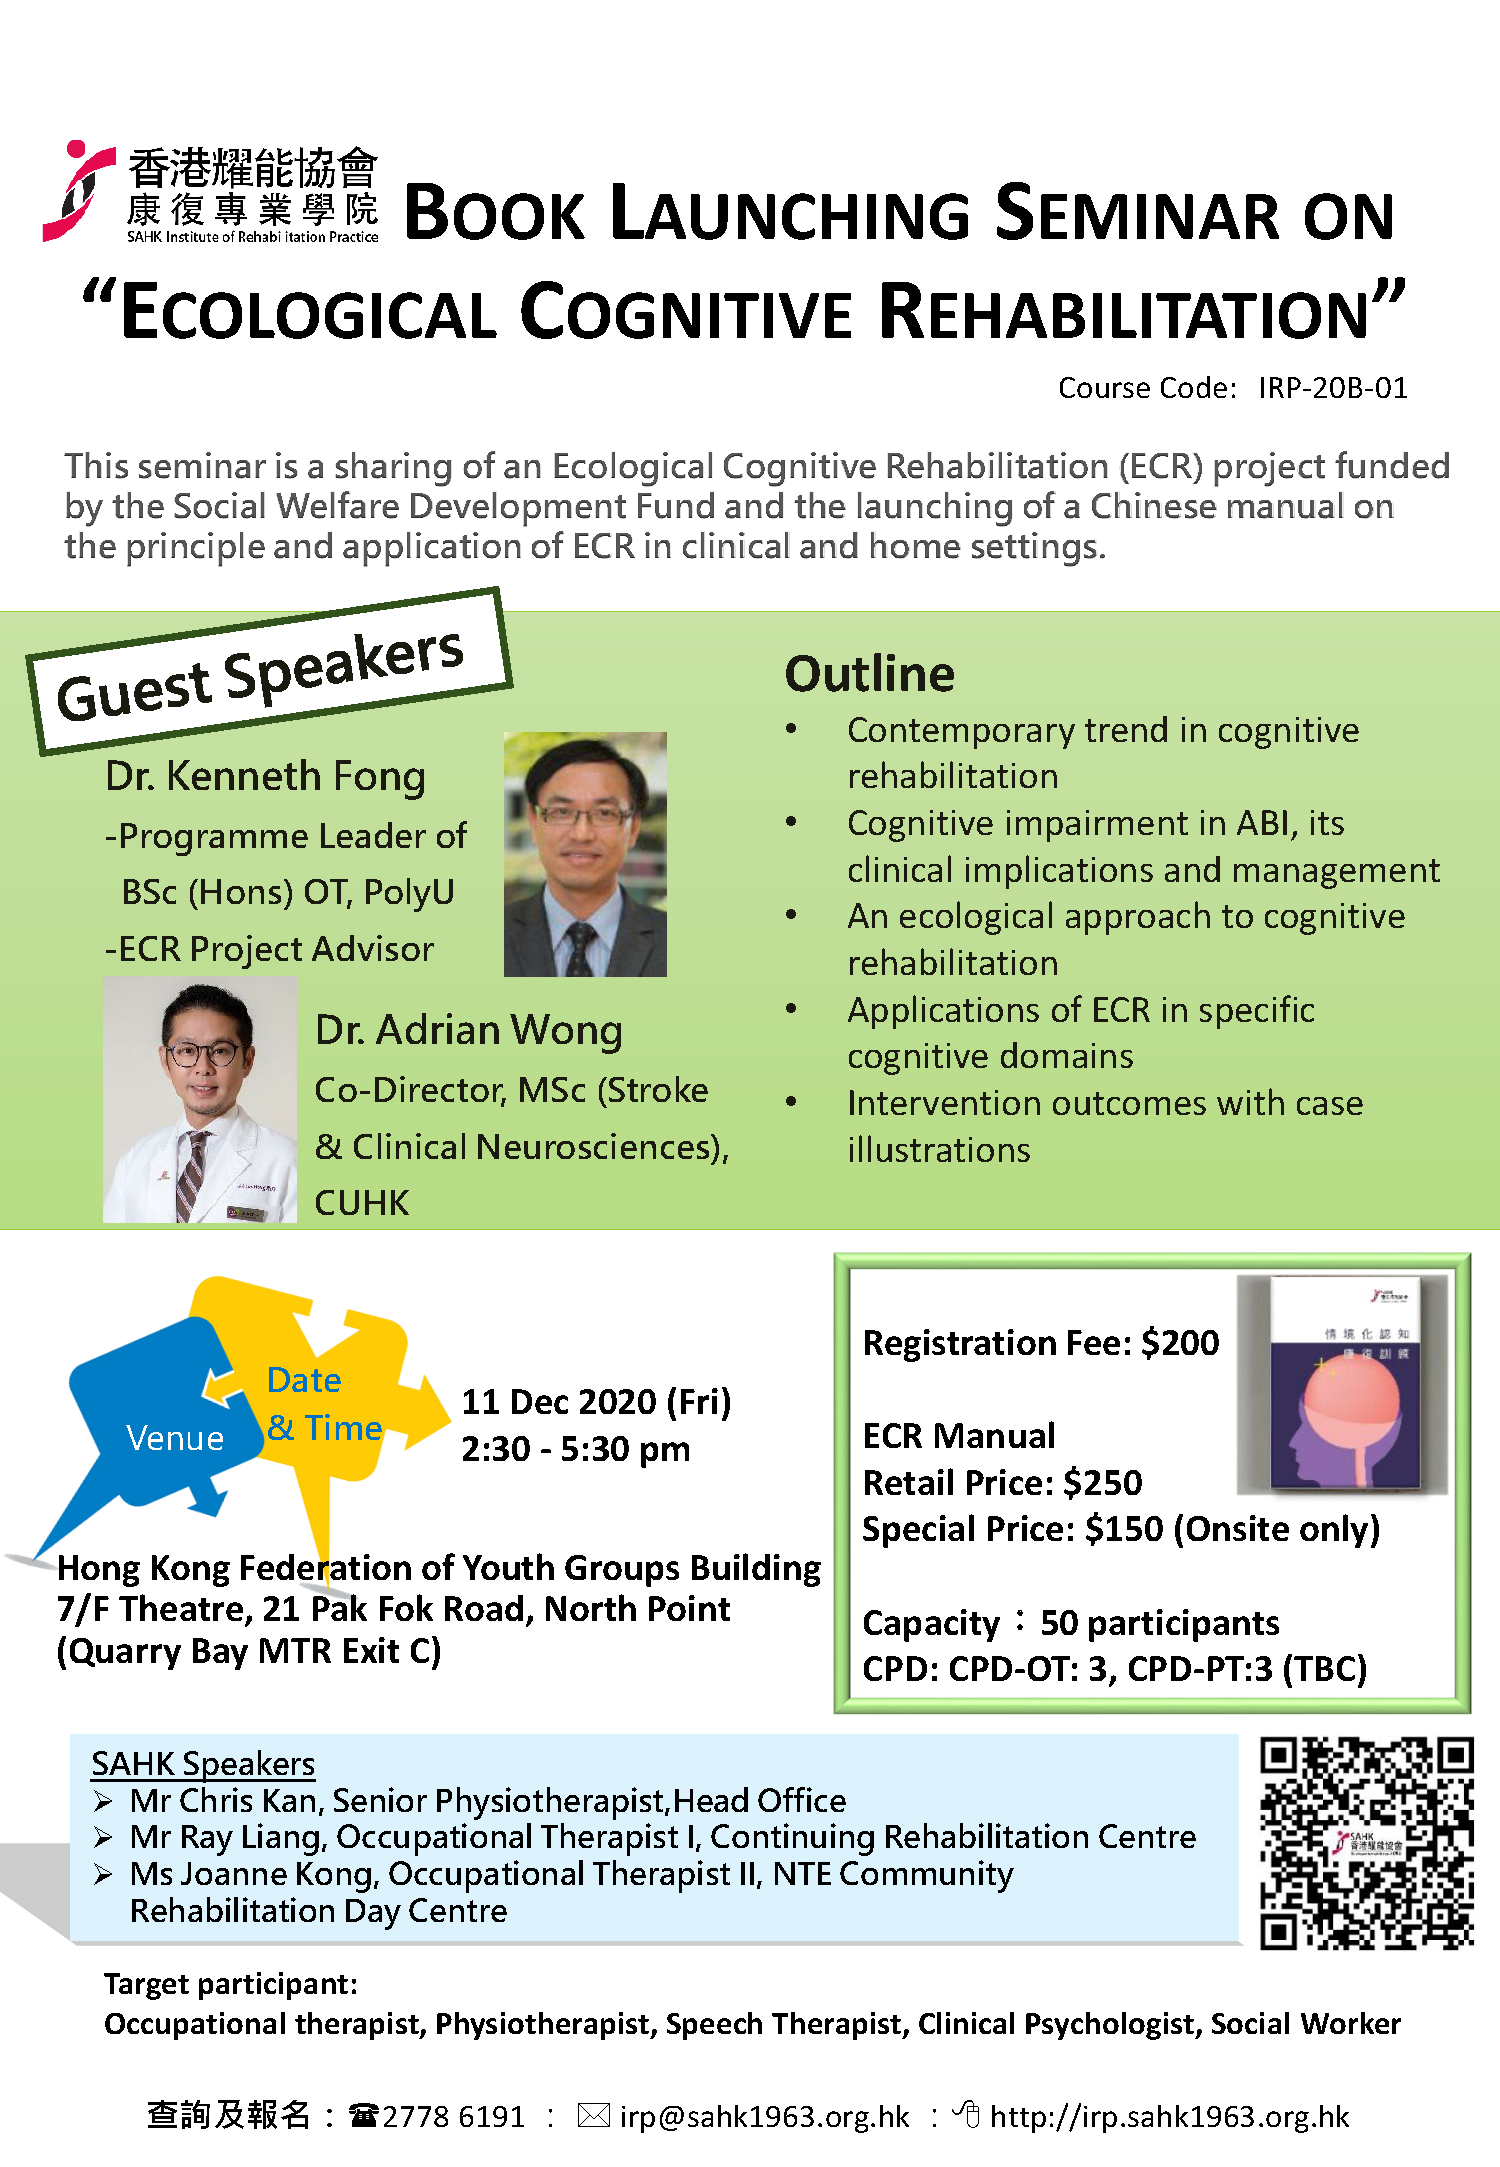 Book Launching Seminar on Ecological Cognitive Rehabilitation